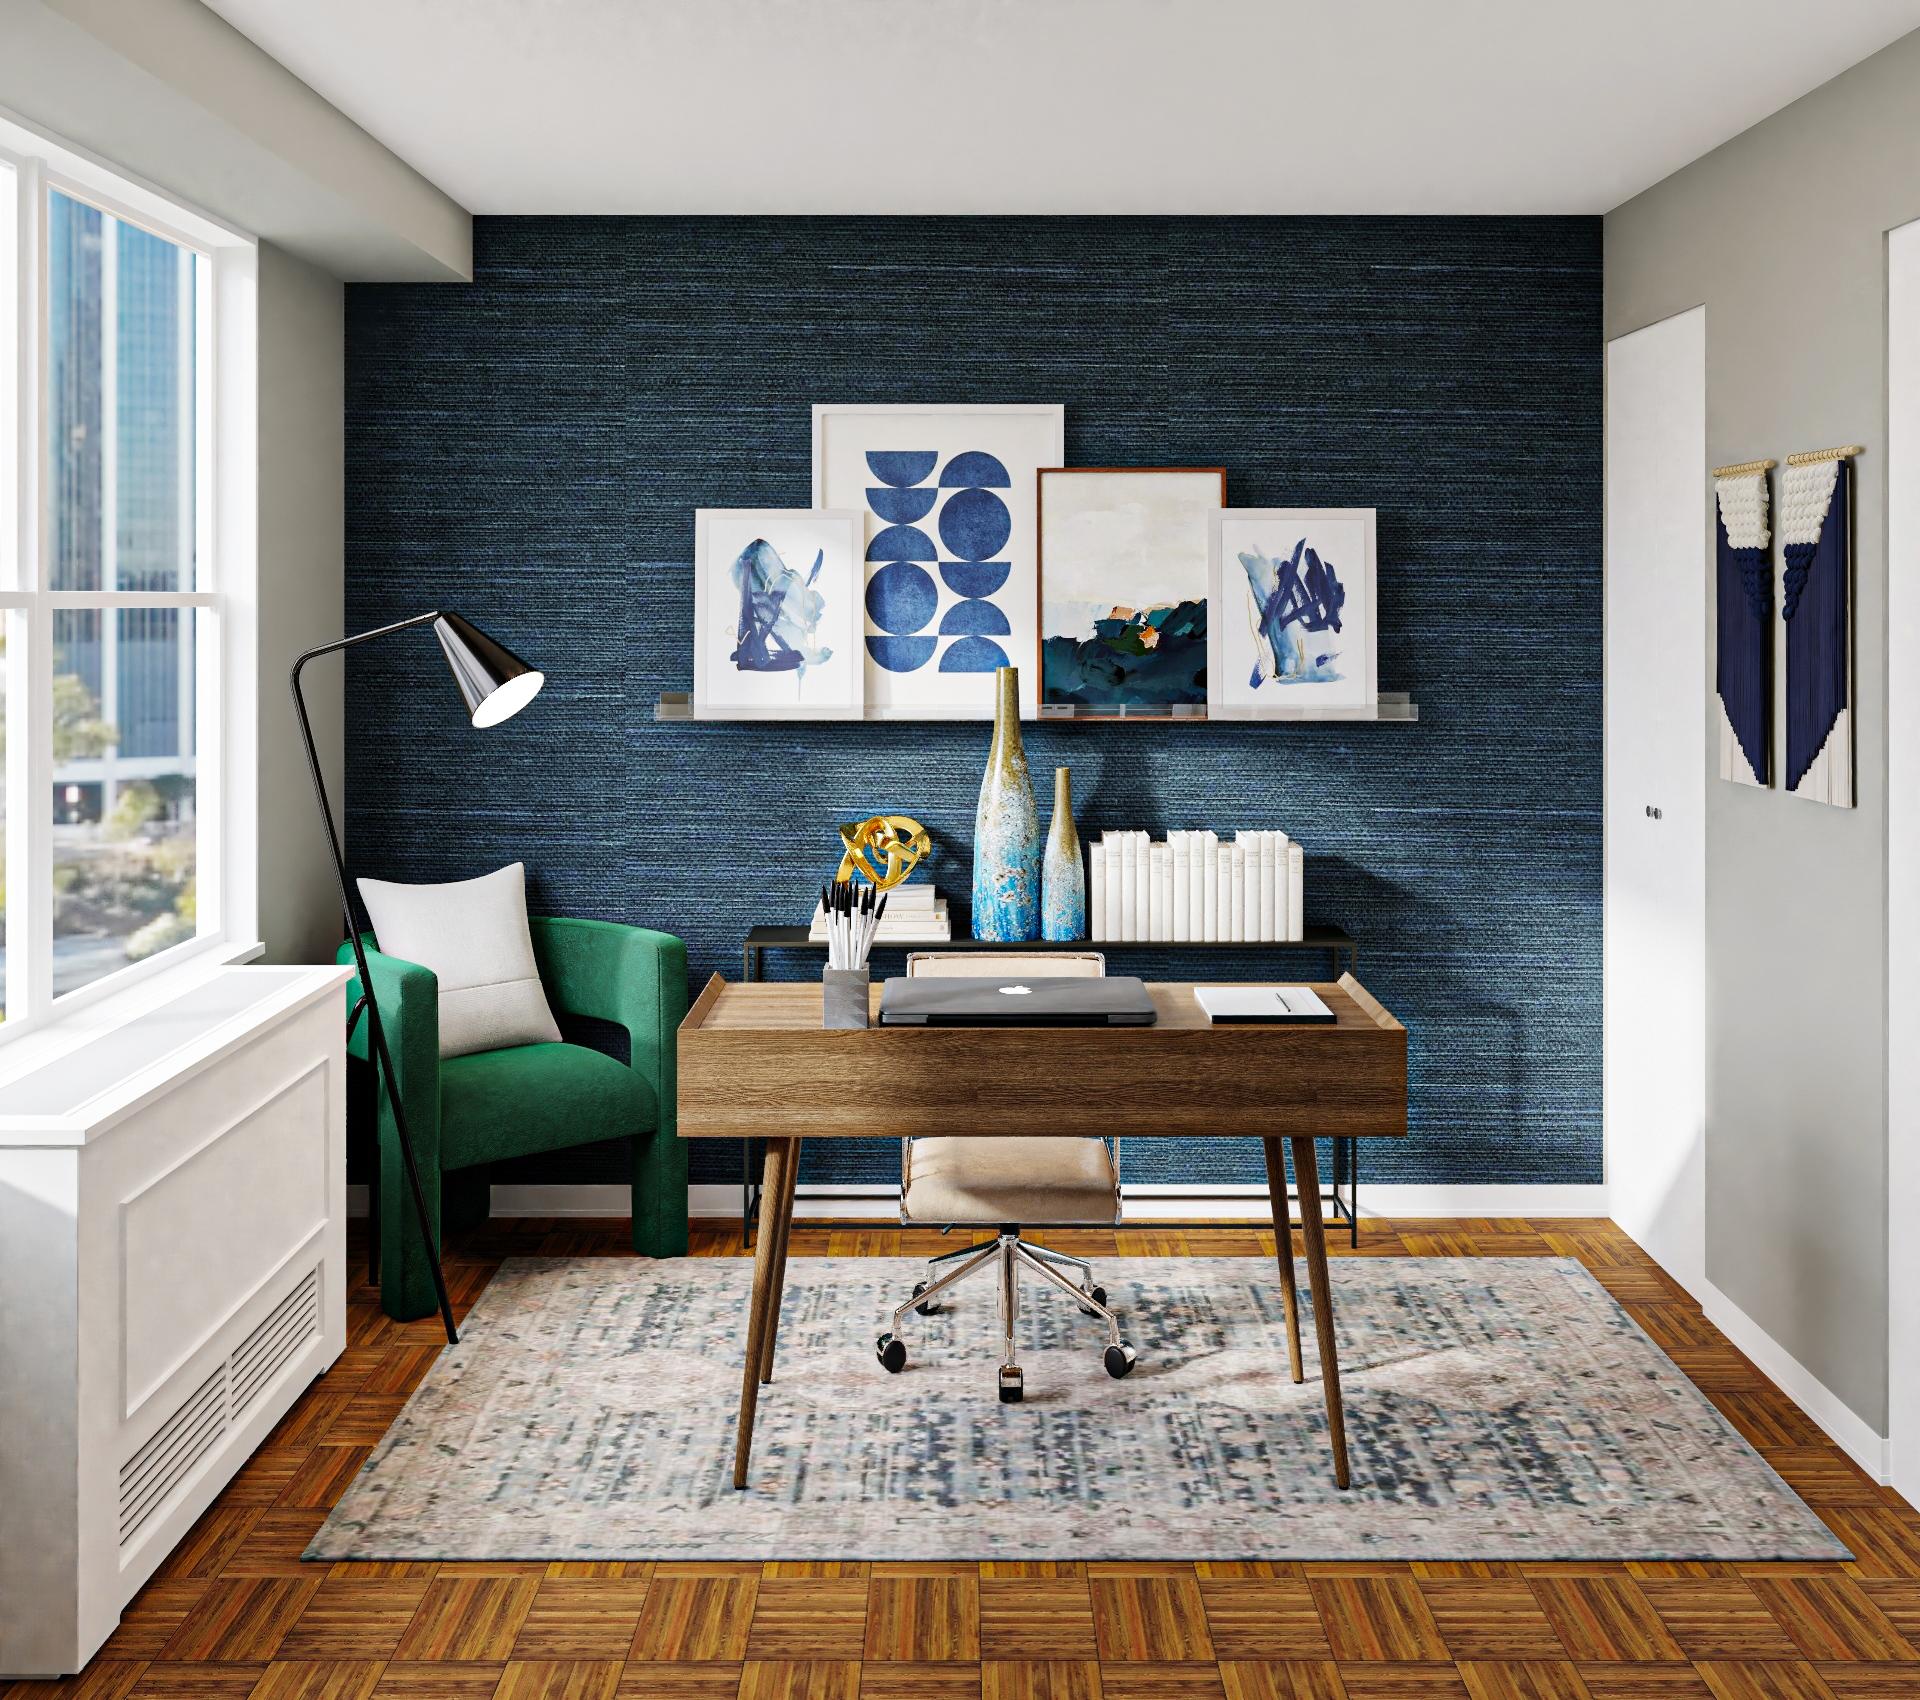 Denim Hues Add Glam To This Modern Home Office